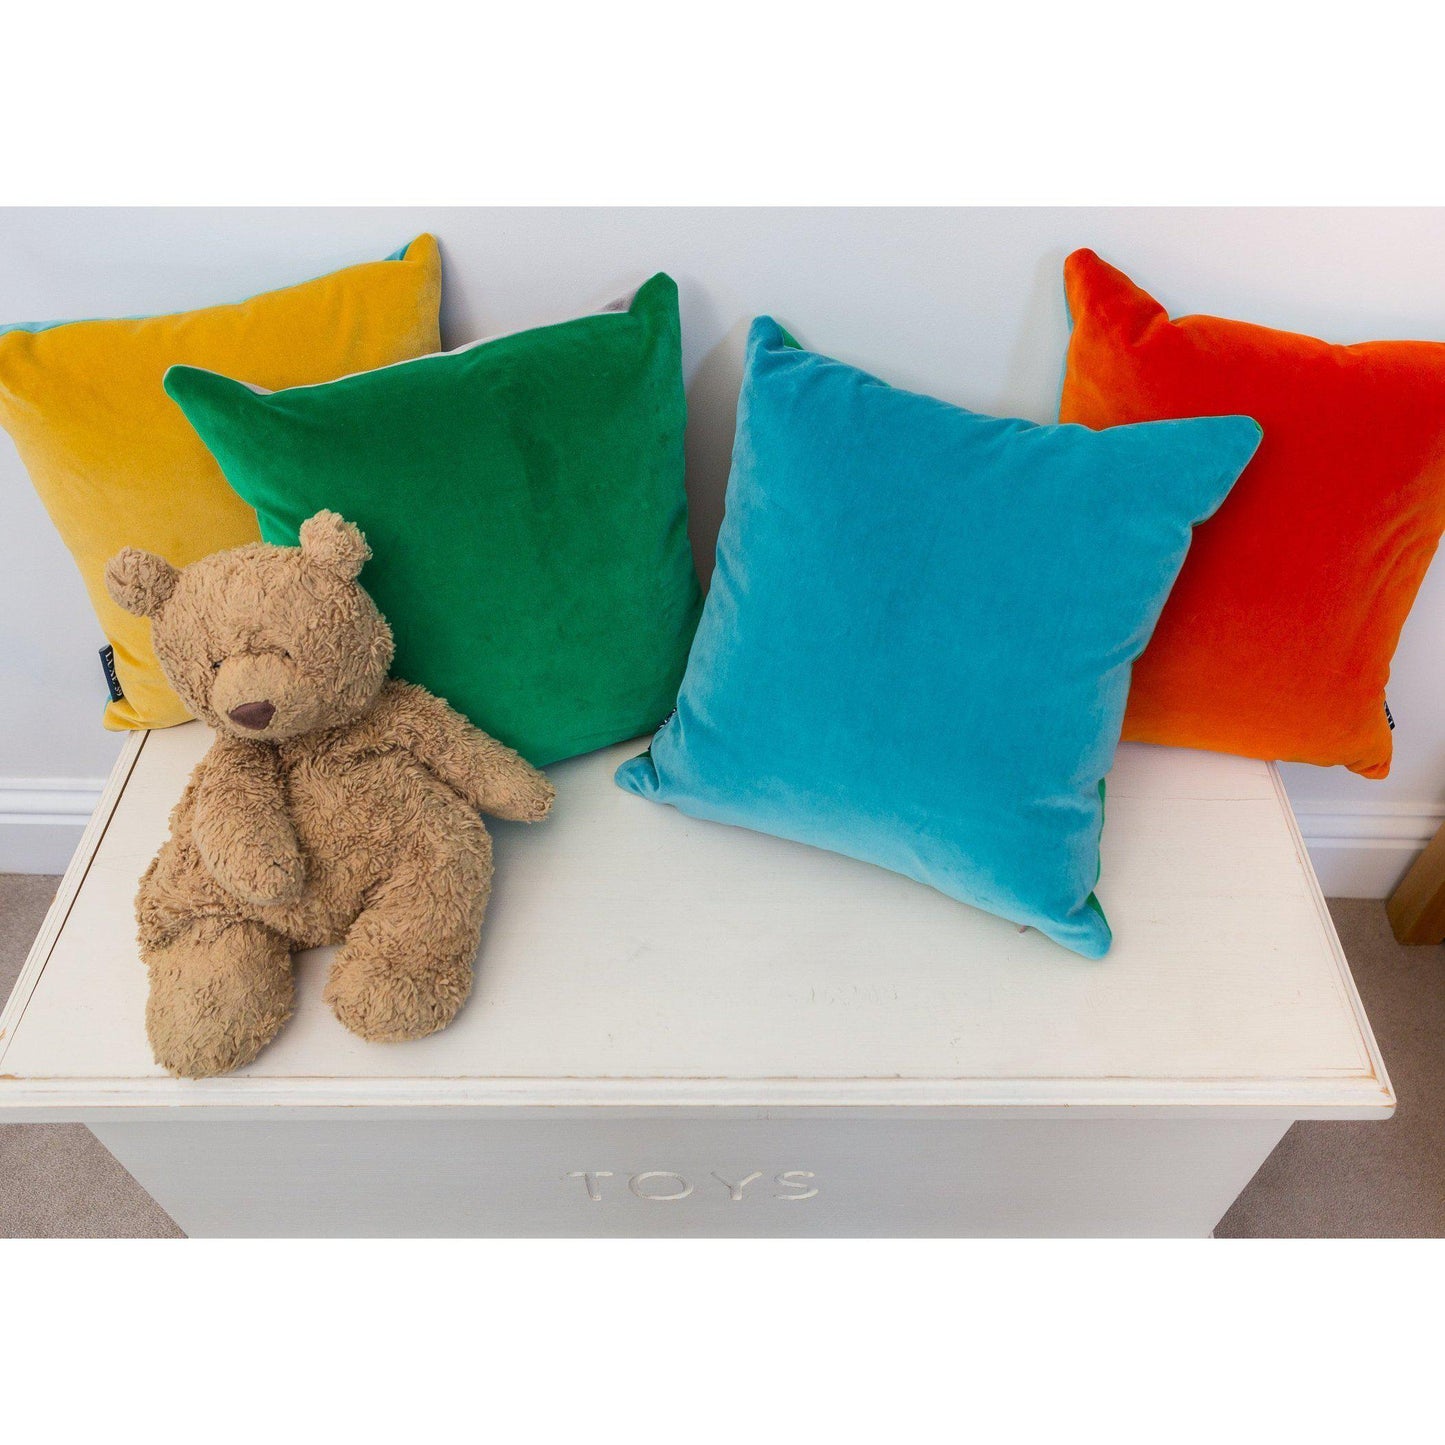 Turquoise Velvet Cushion with Mustard Yellow Luxe 39